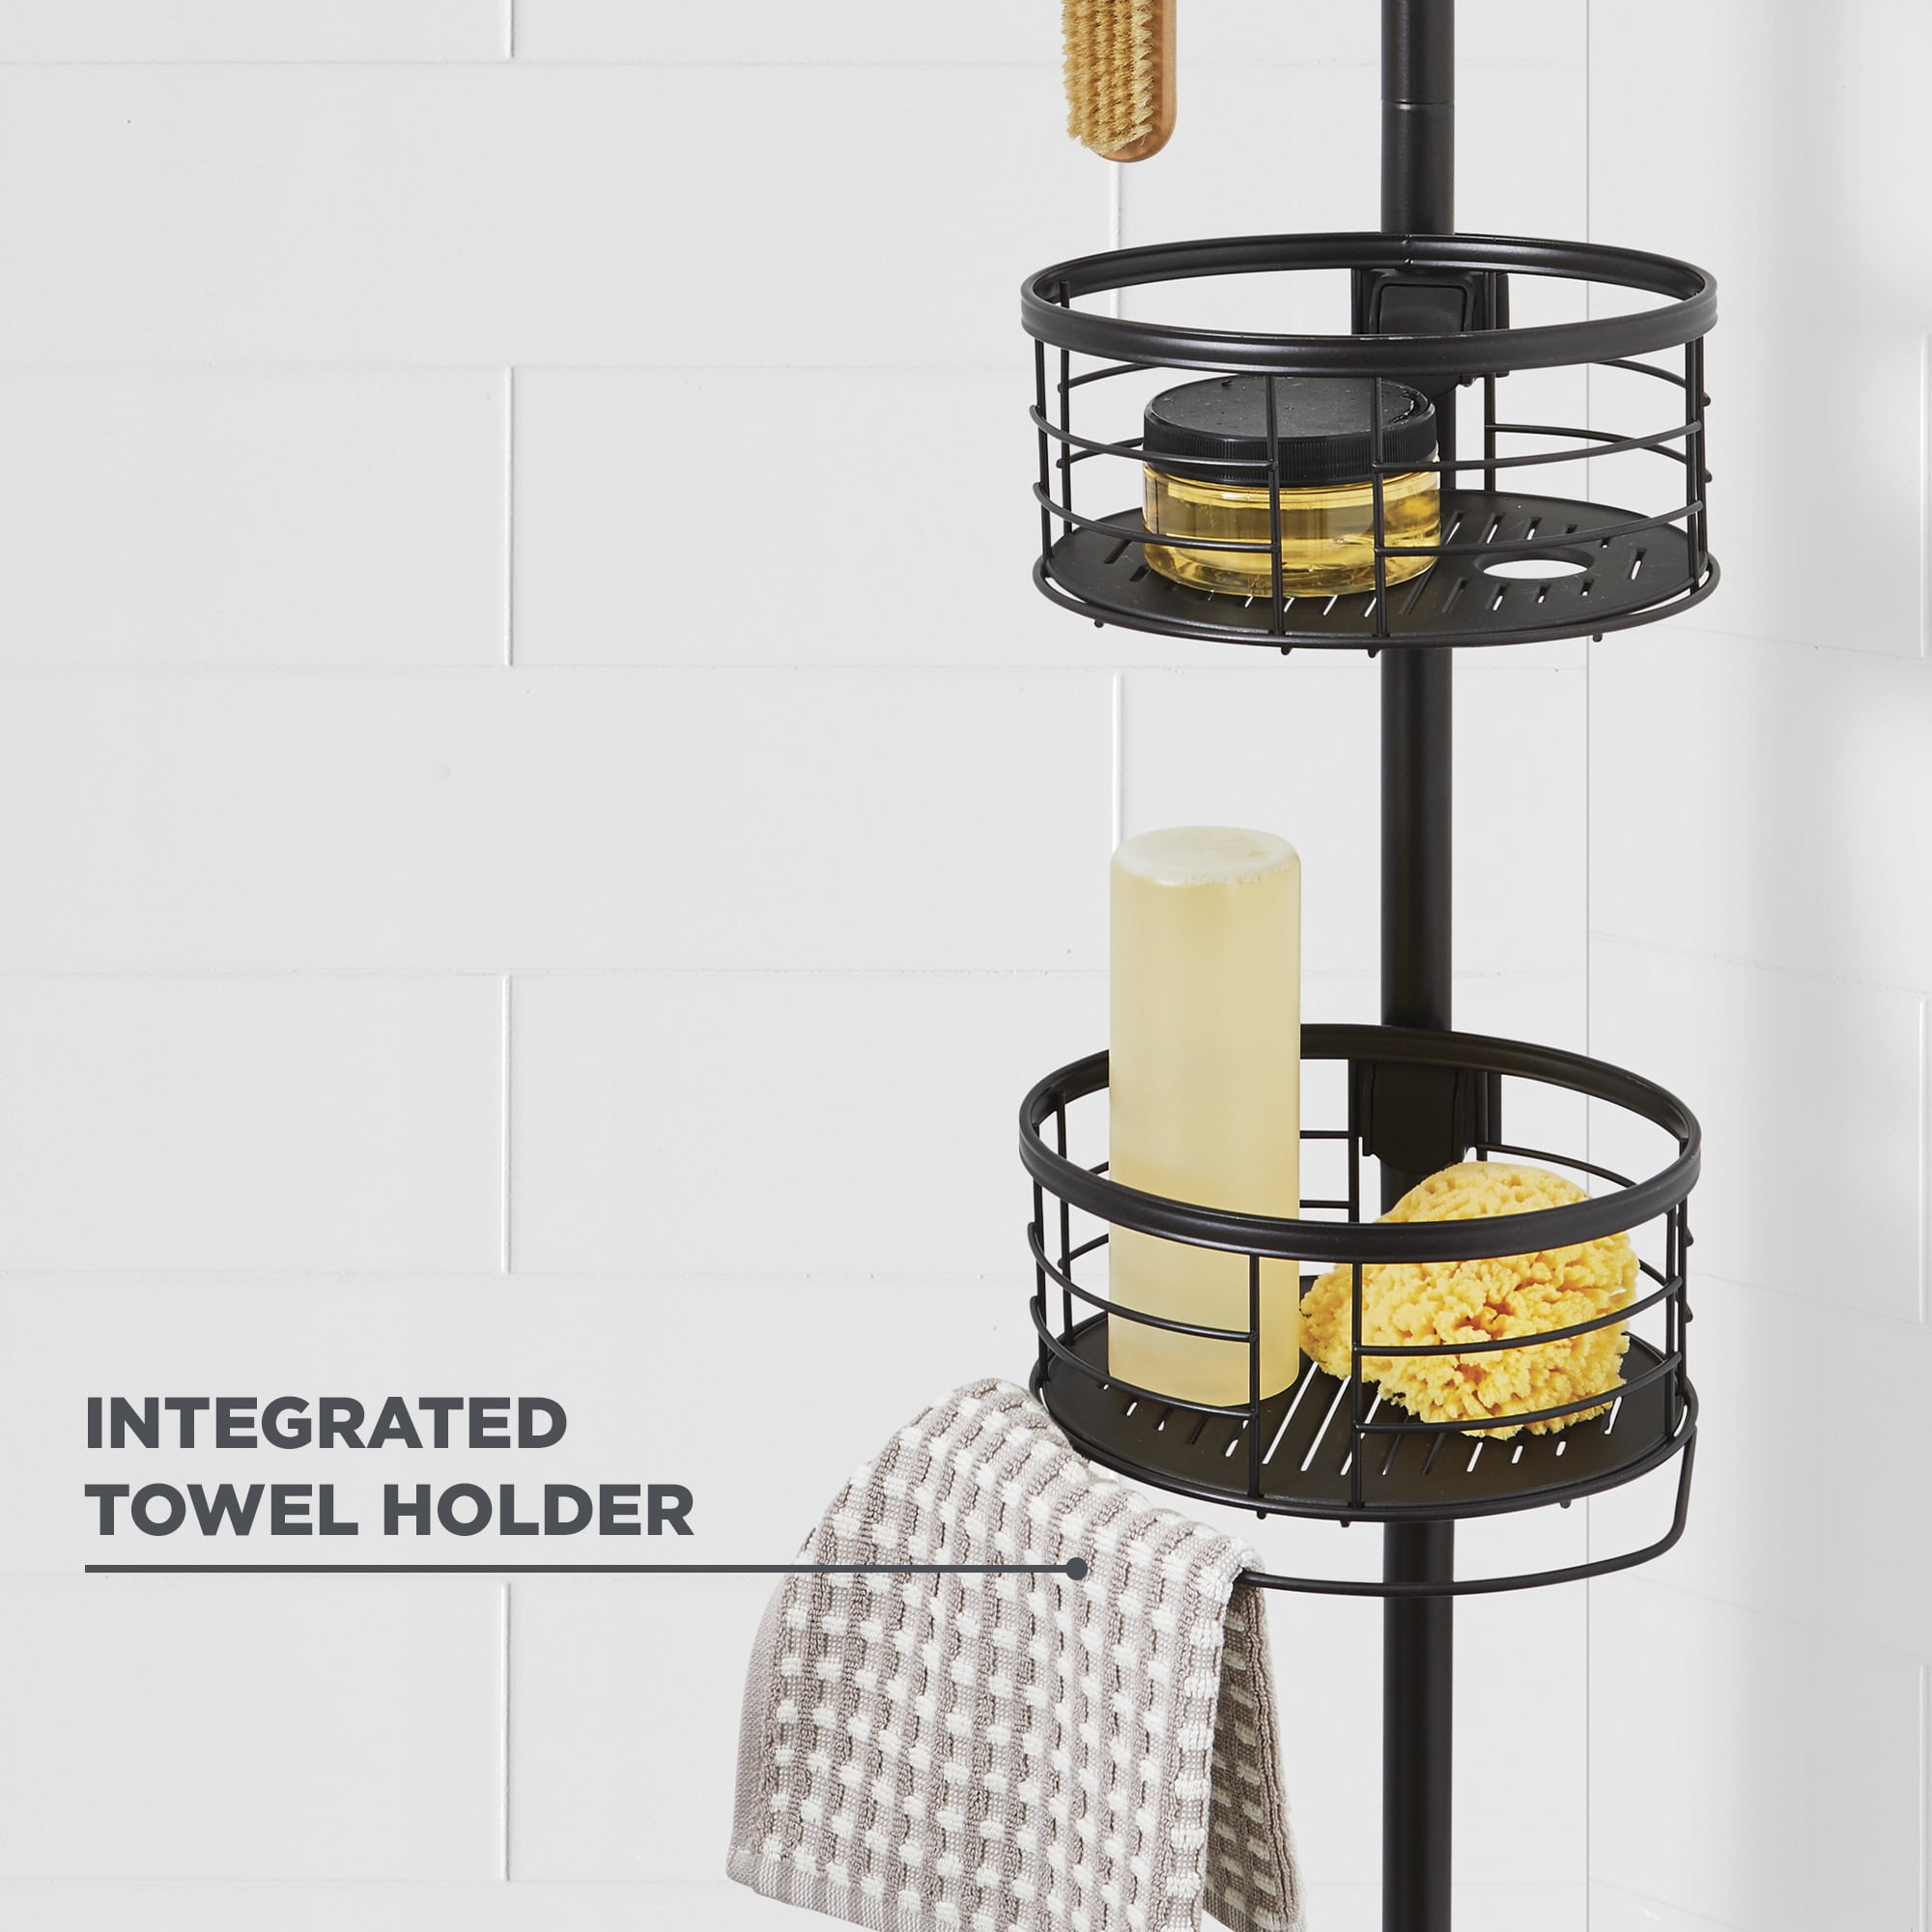 at Home Bronze Metal Shower Caddy, 18.3